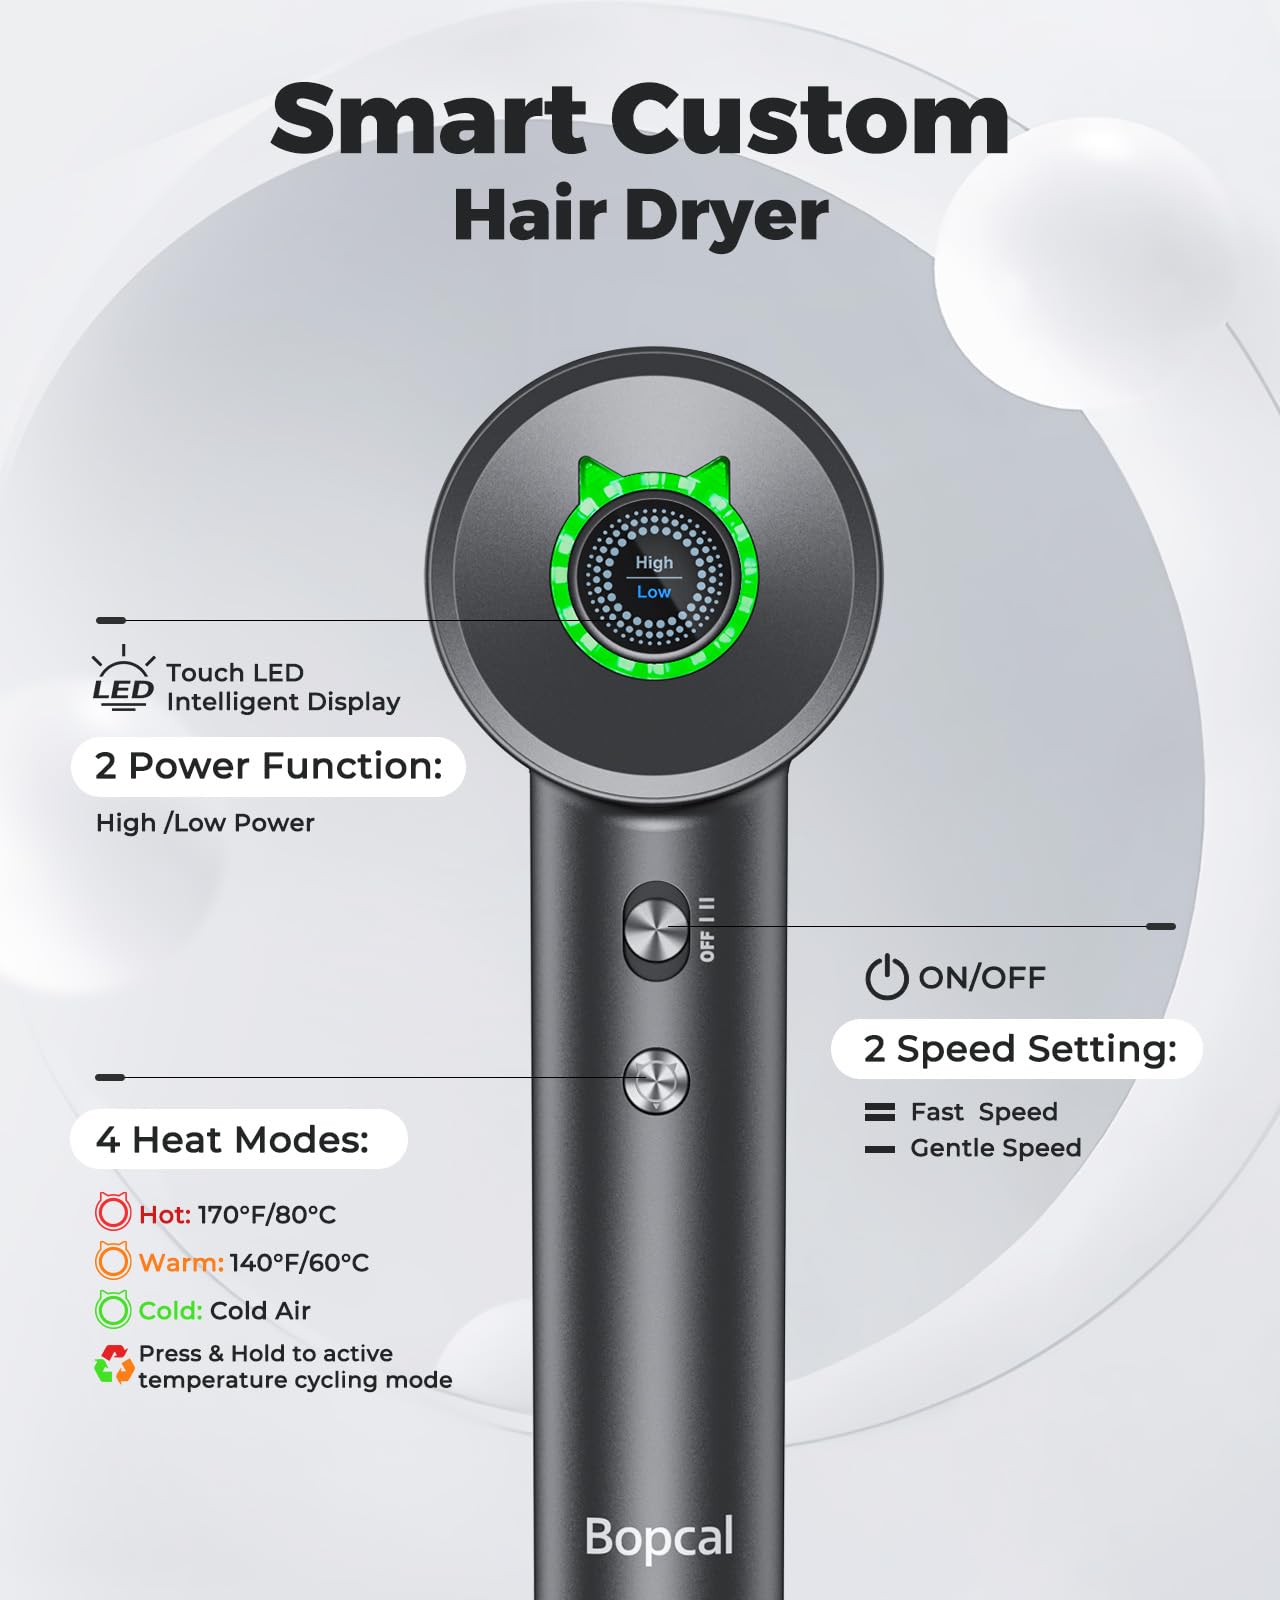 Bopcal High Speed Hair Dryer, Professional Ionic Blow Dryer for Fast Drying,110000 RPM, Lightweight Low Noise Thermo-Control Hairdryer with Magnetic Nozzle for Home, Travel, and Gift(1500W)